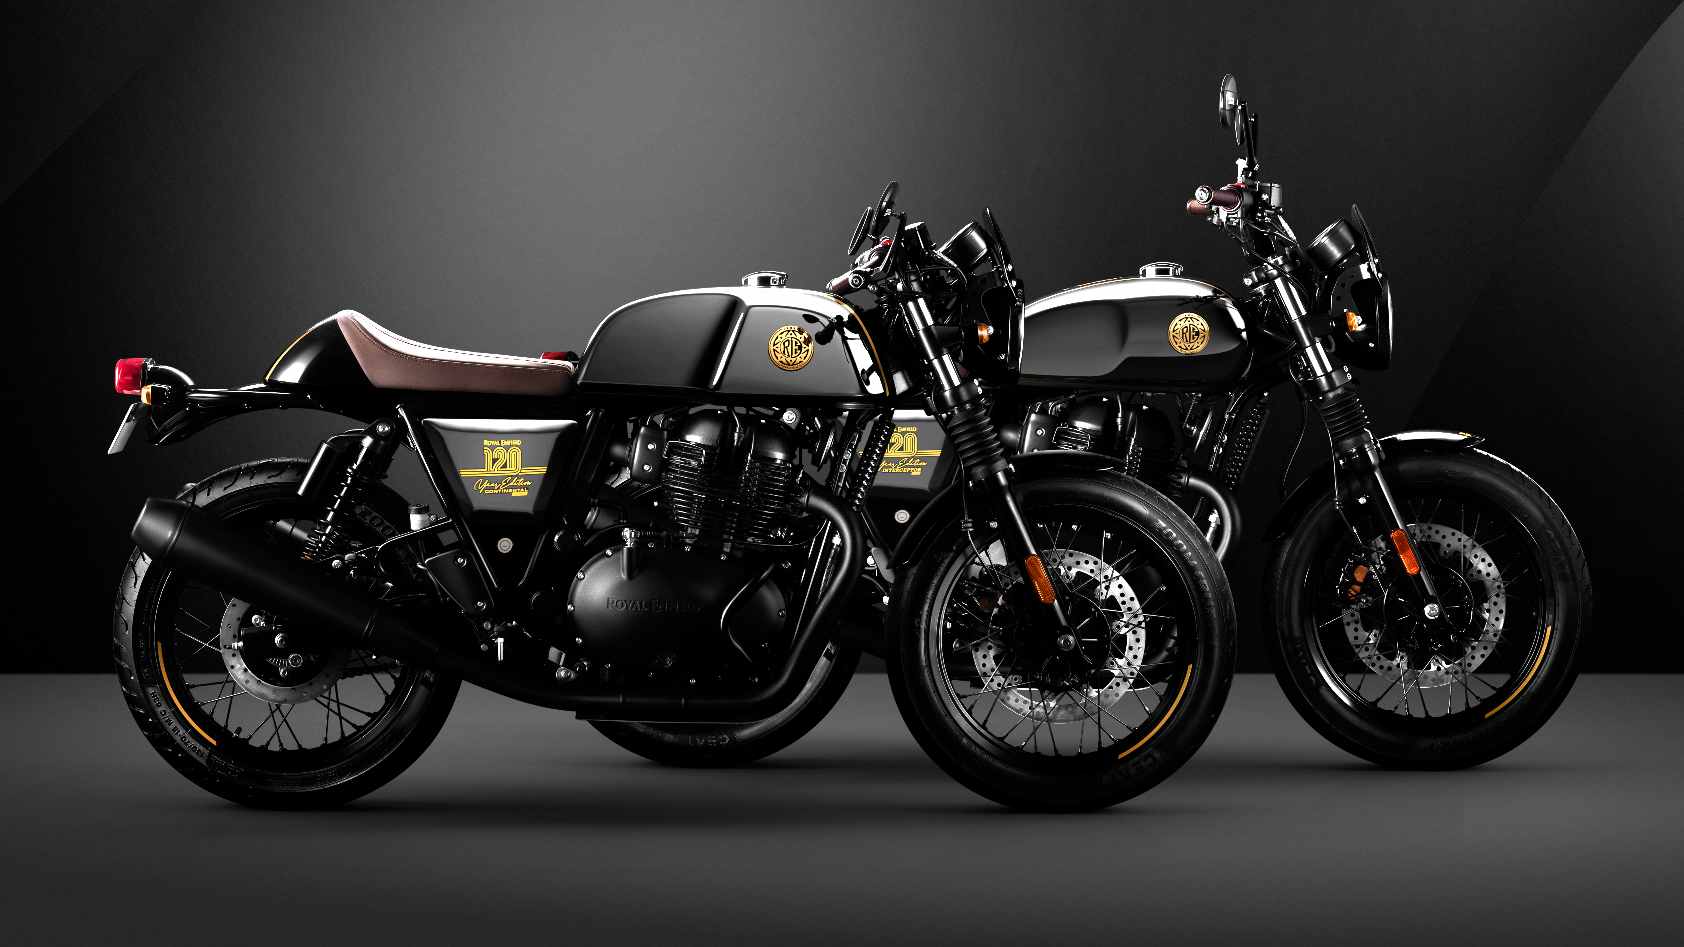 You are currently viewing Royal Enfield unveils 120th Year Anniversary Editions of the Interceptor 650, Continental GT 650 at EICMA 2021- Technology News, FP